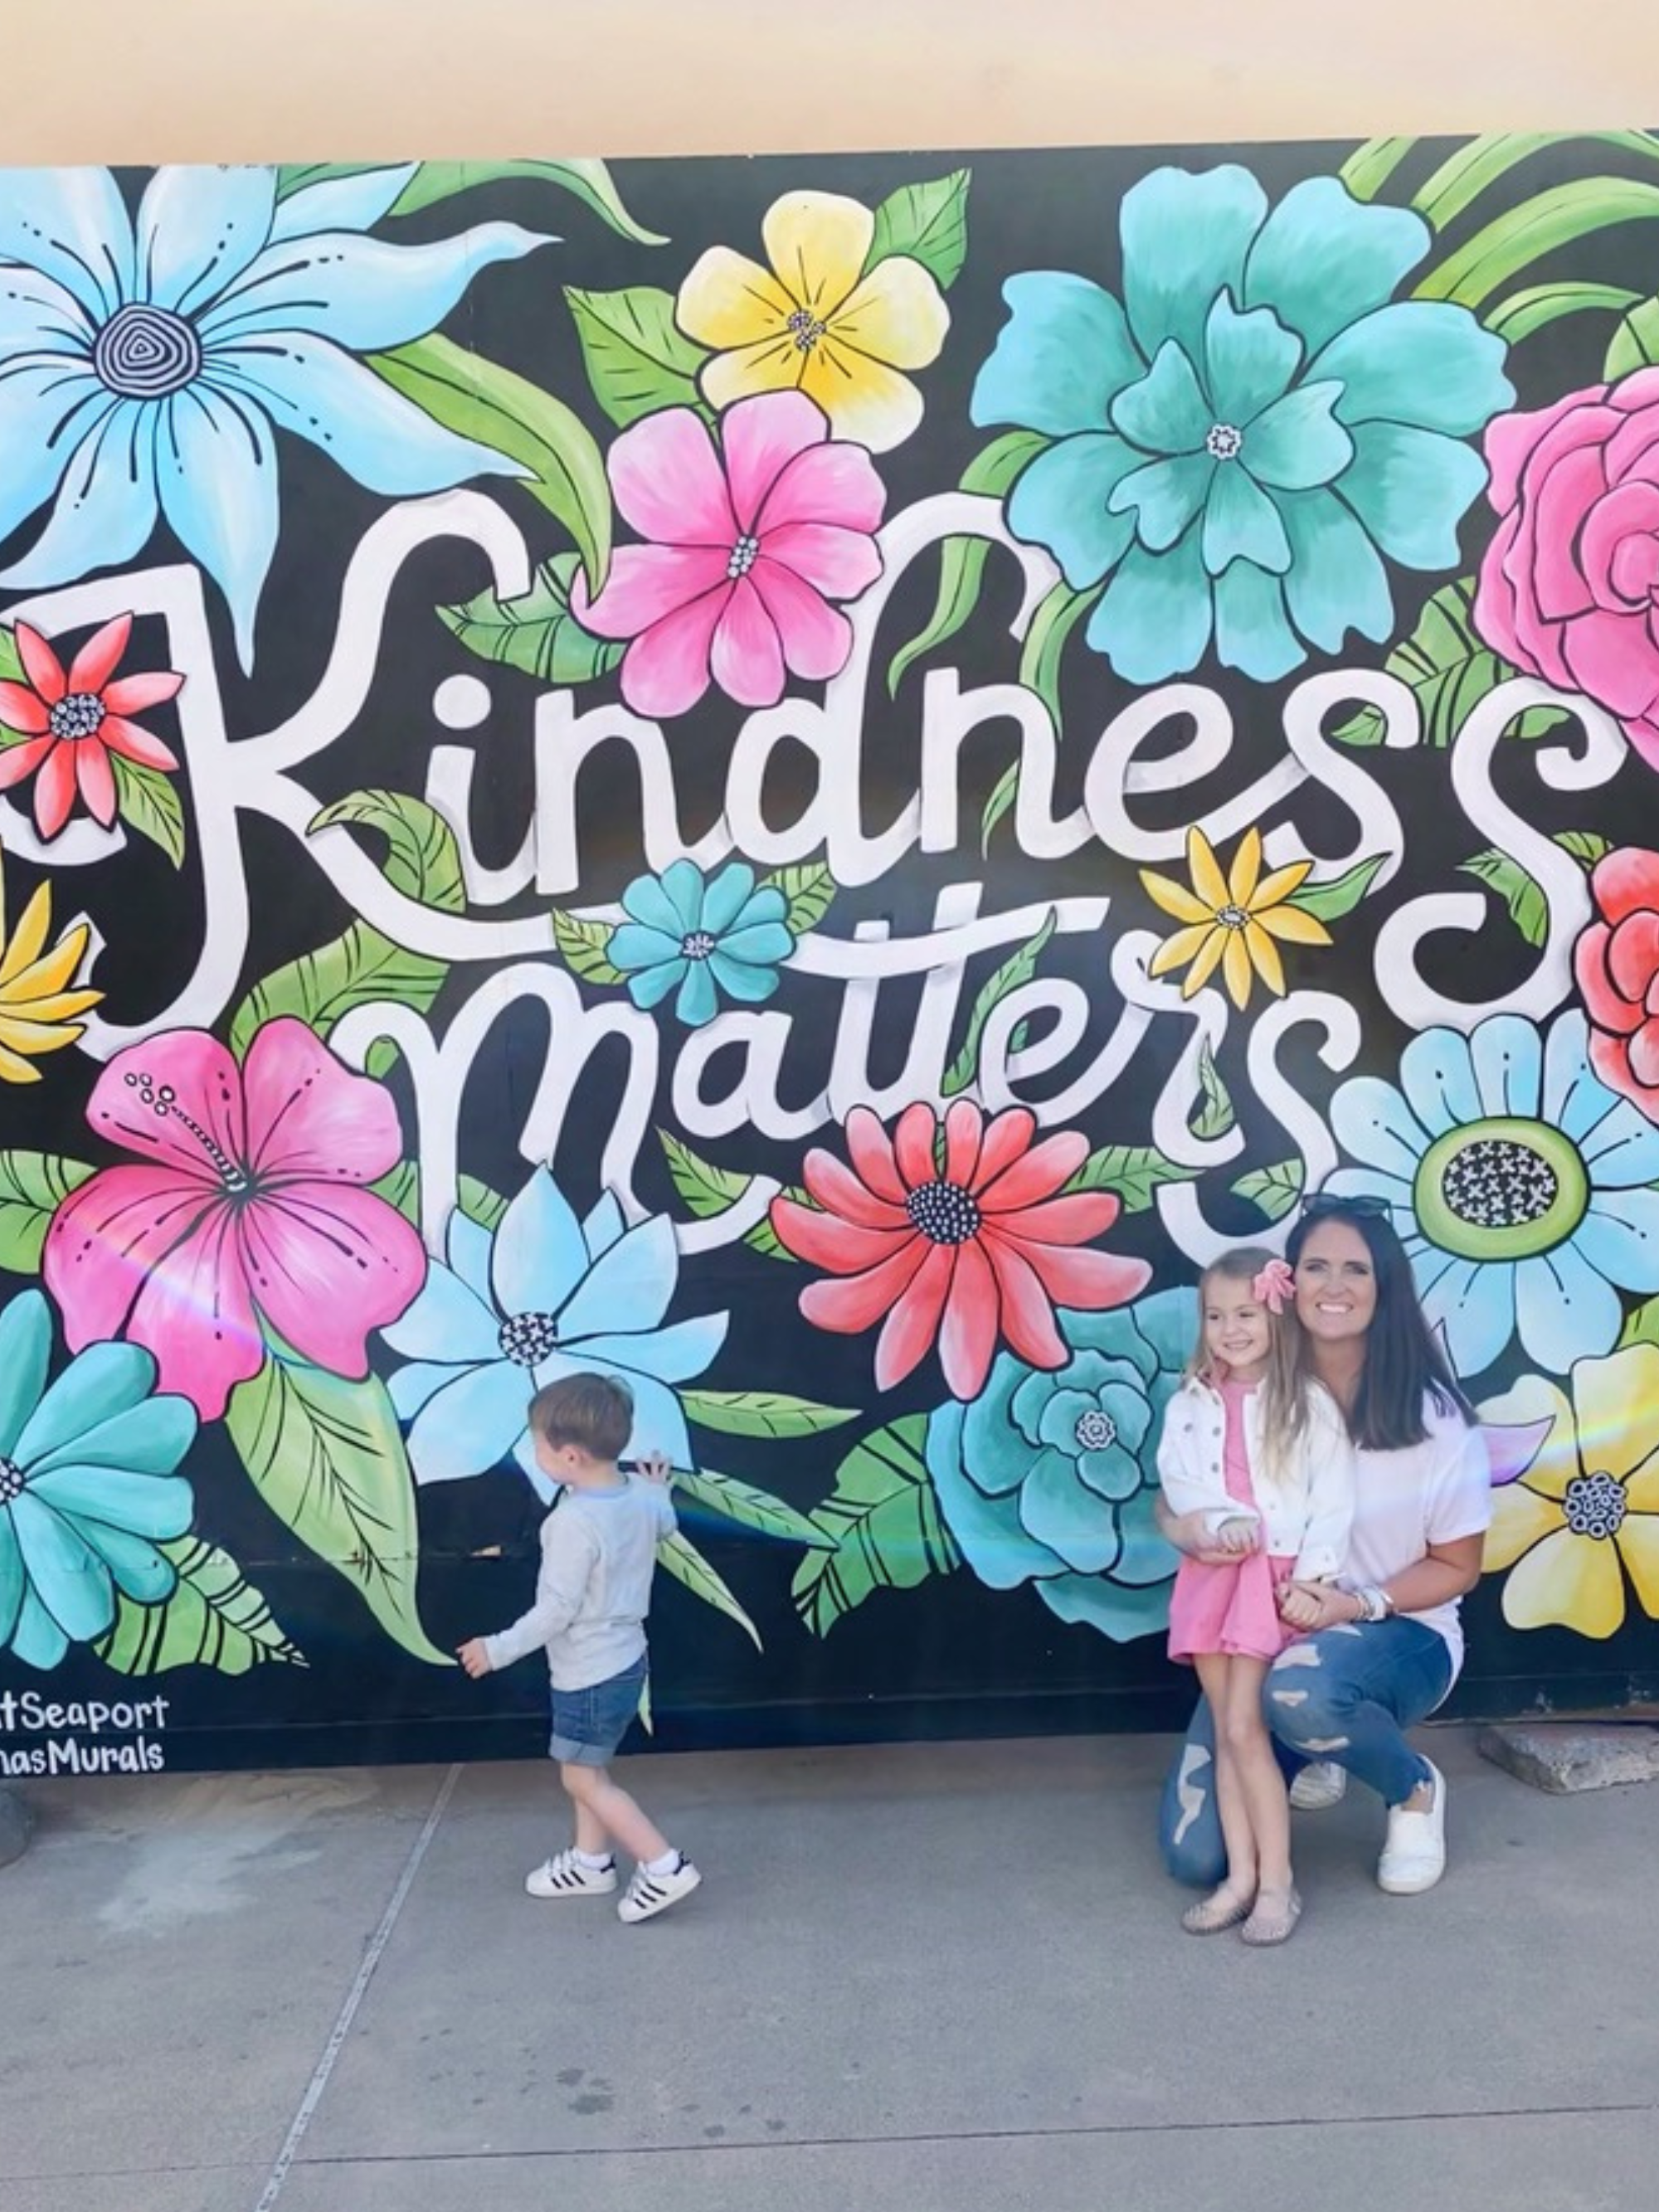 Floral Kindness Matters mural in San Diego